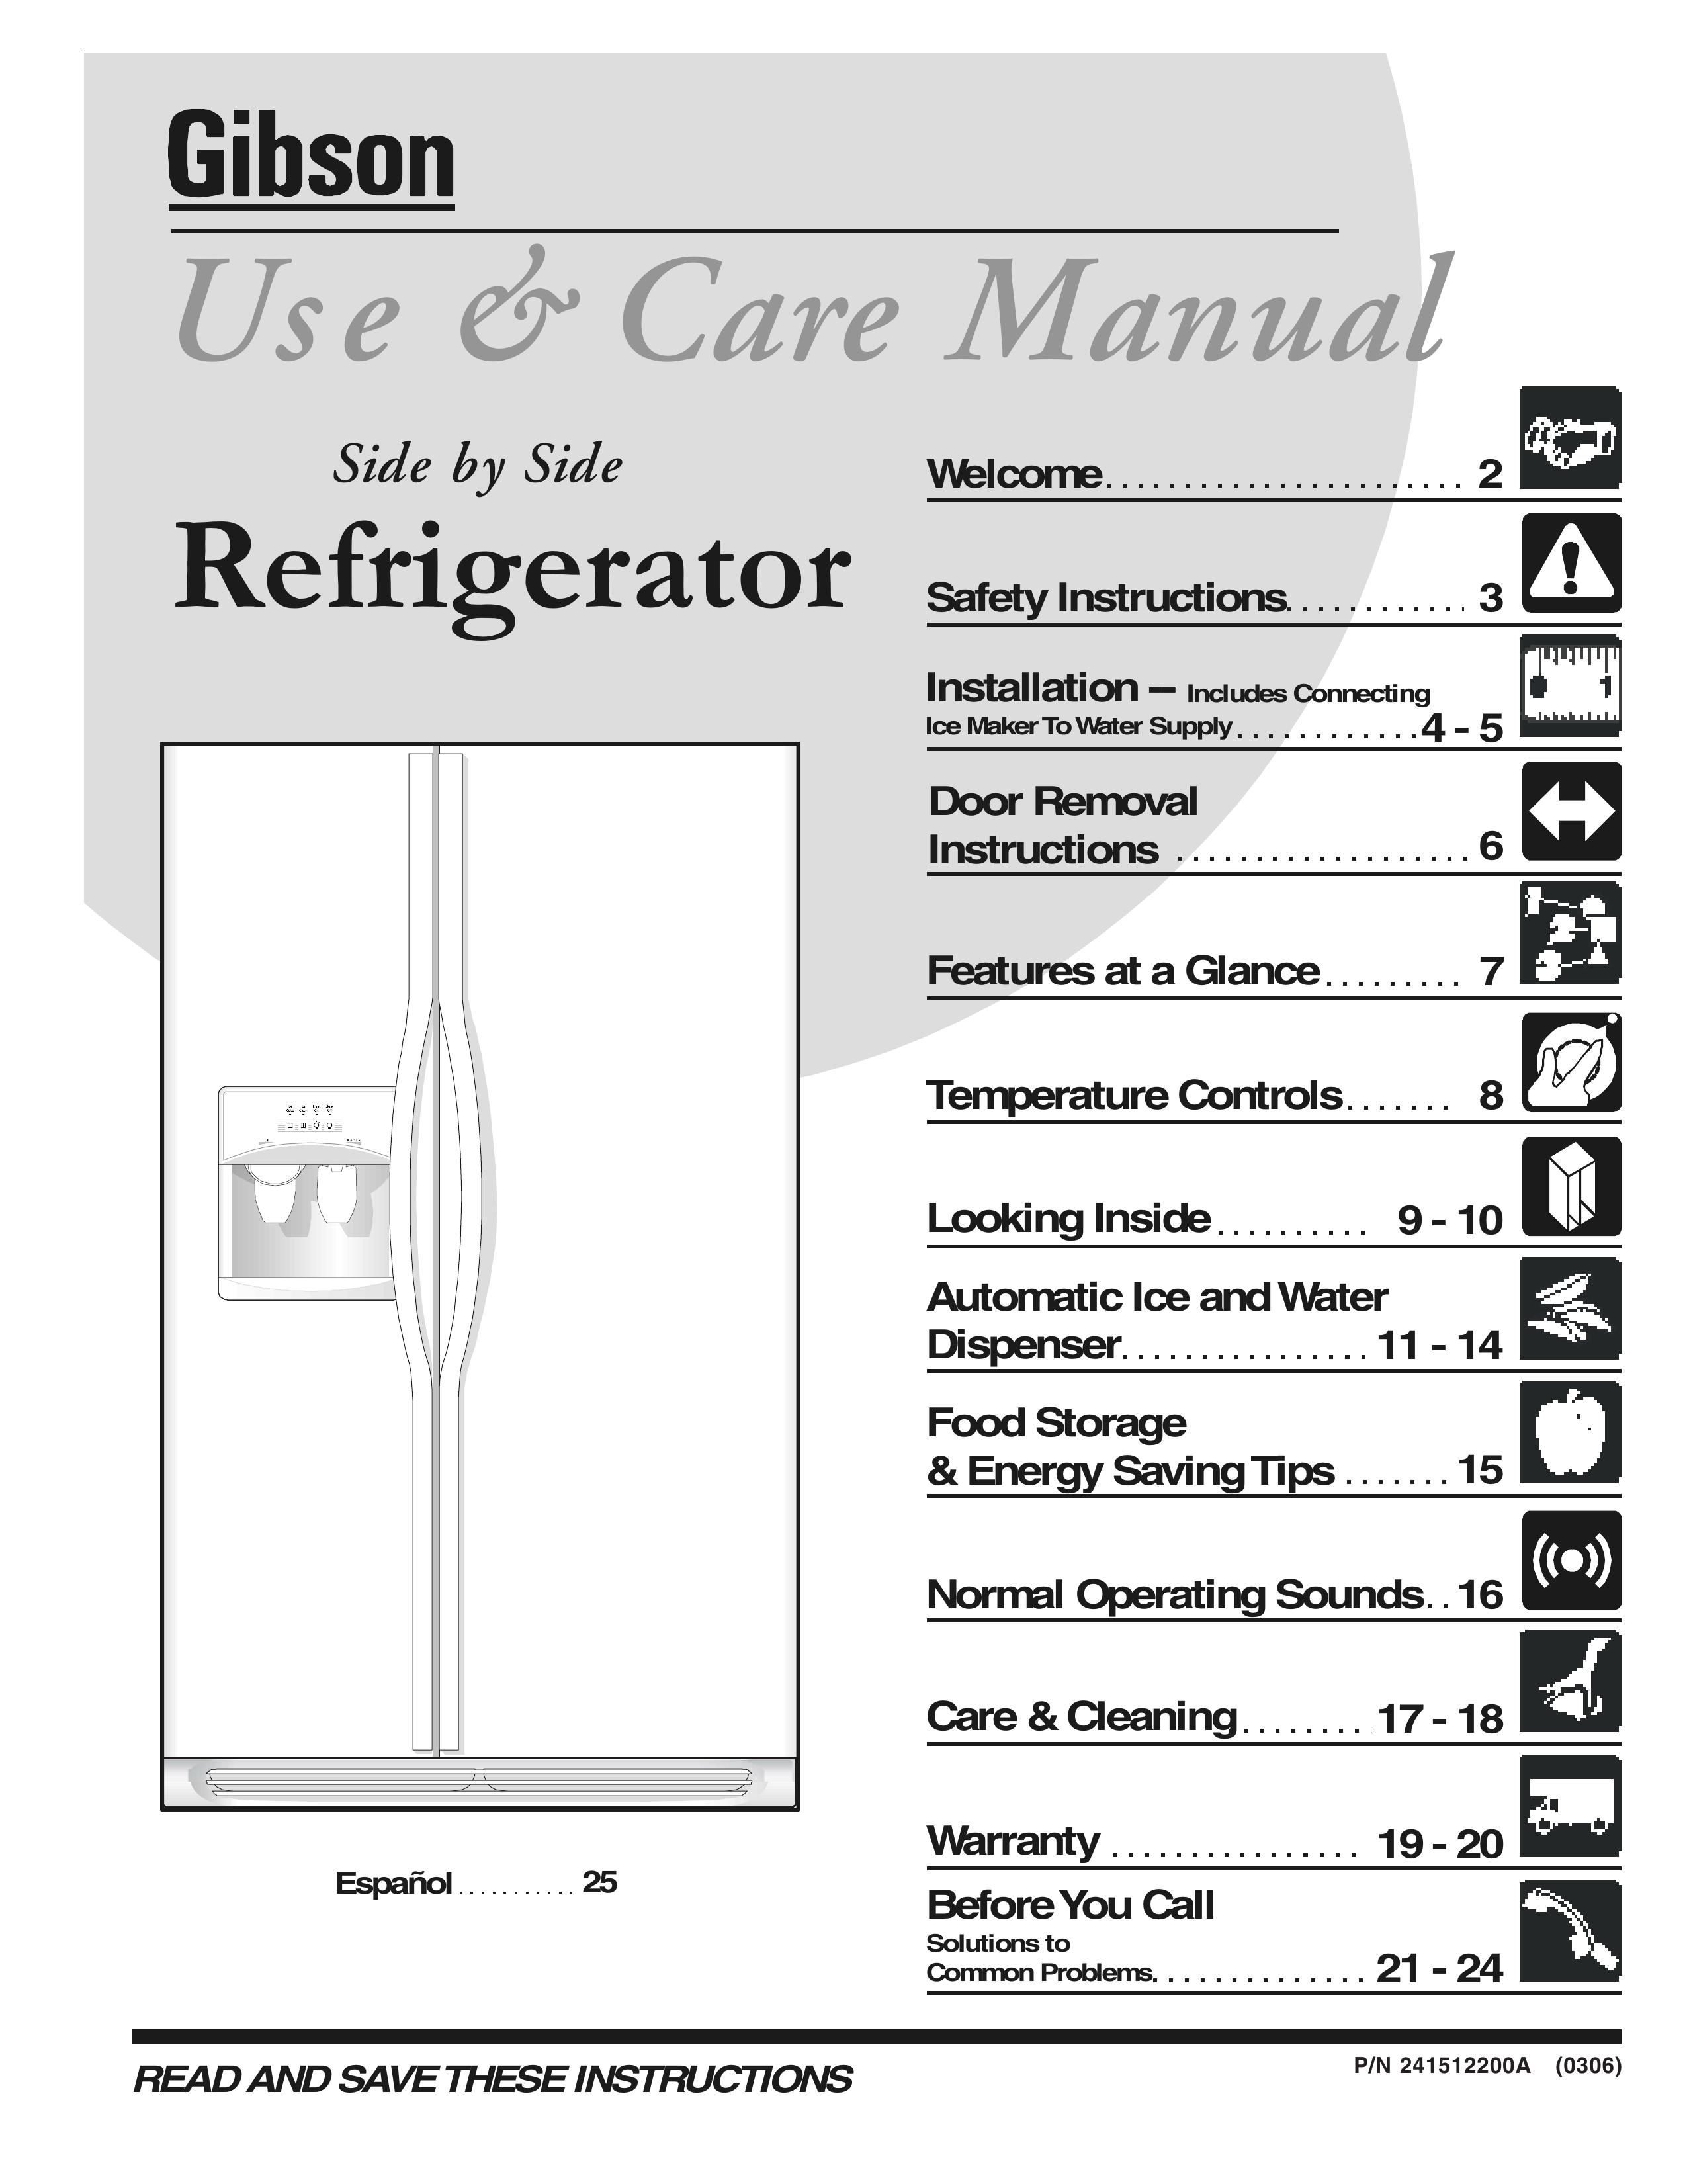 Electrolux - Gibson 241512200A Refrigerator User Manual